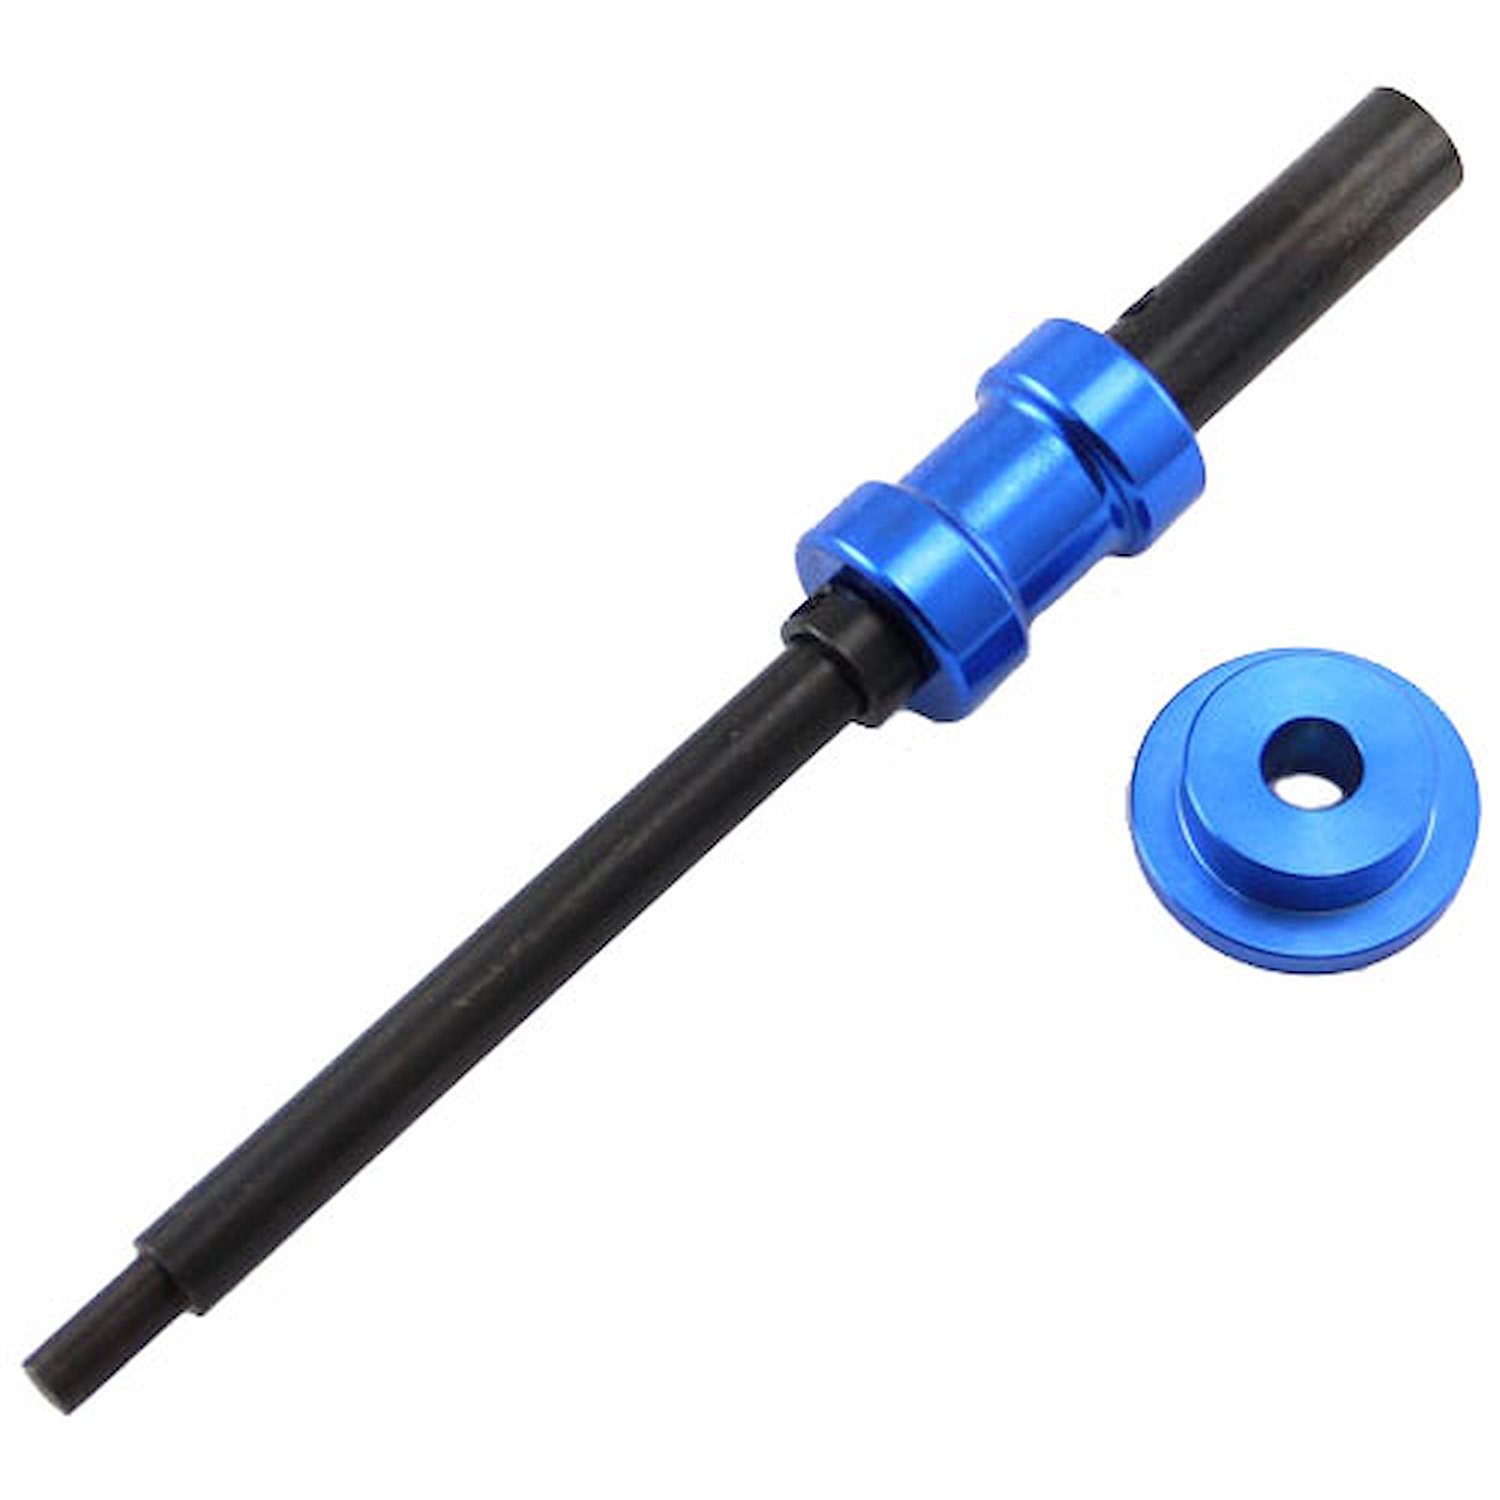 Engine Oil Pump Primer Tool for Small &